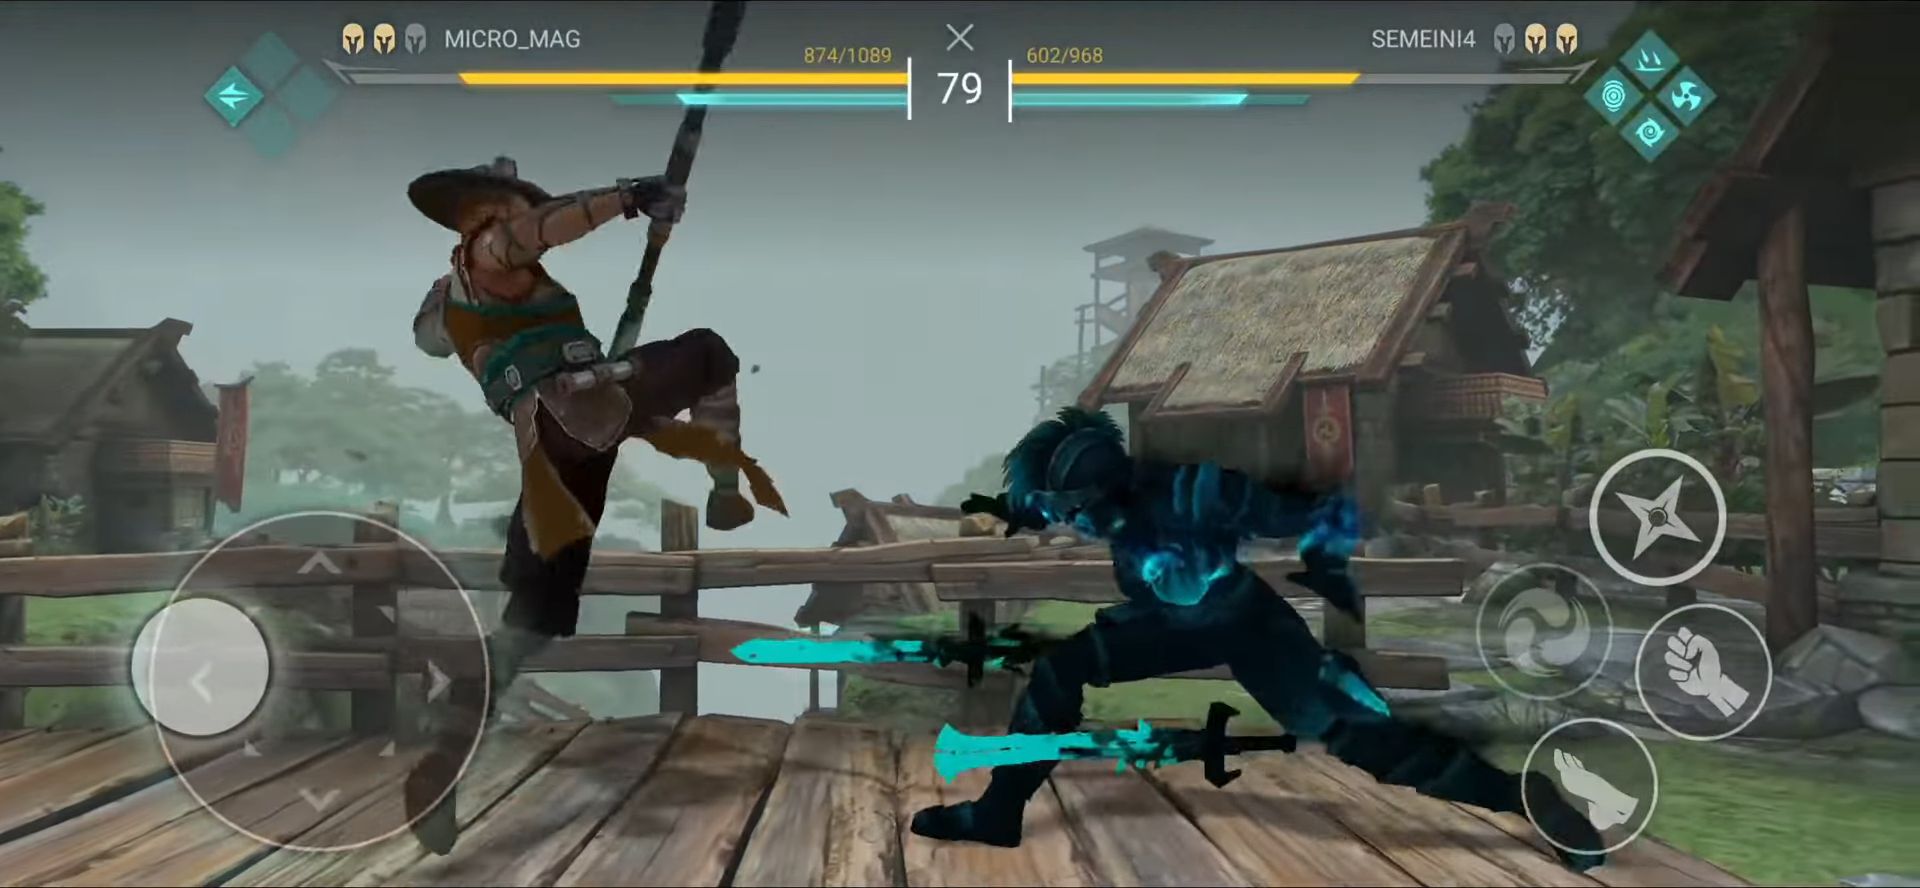 shadow fight arena 4 download free